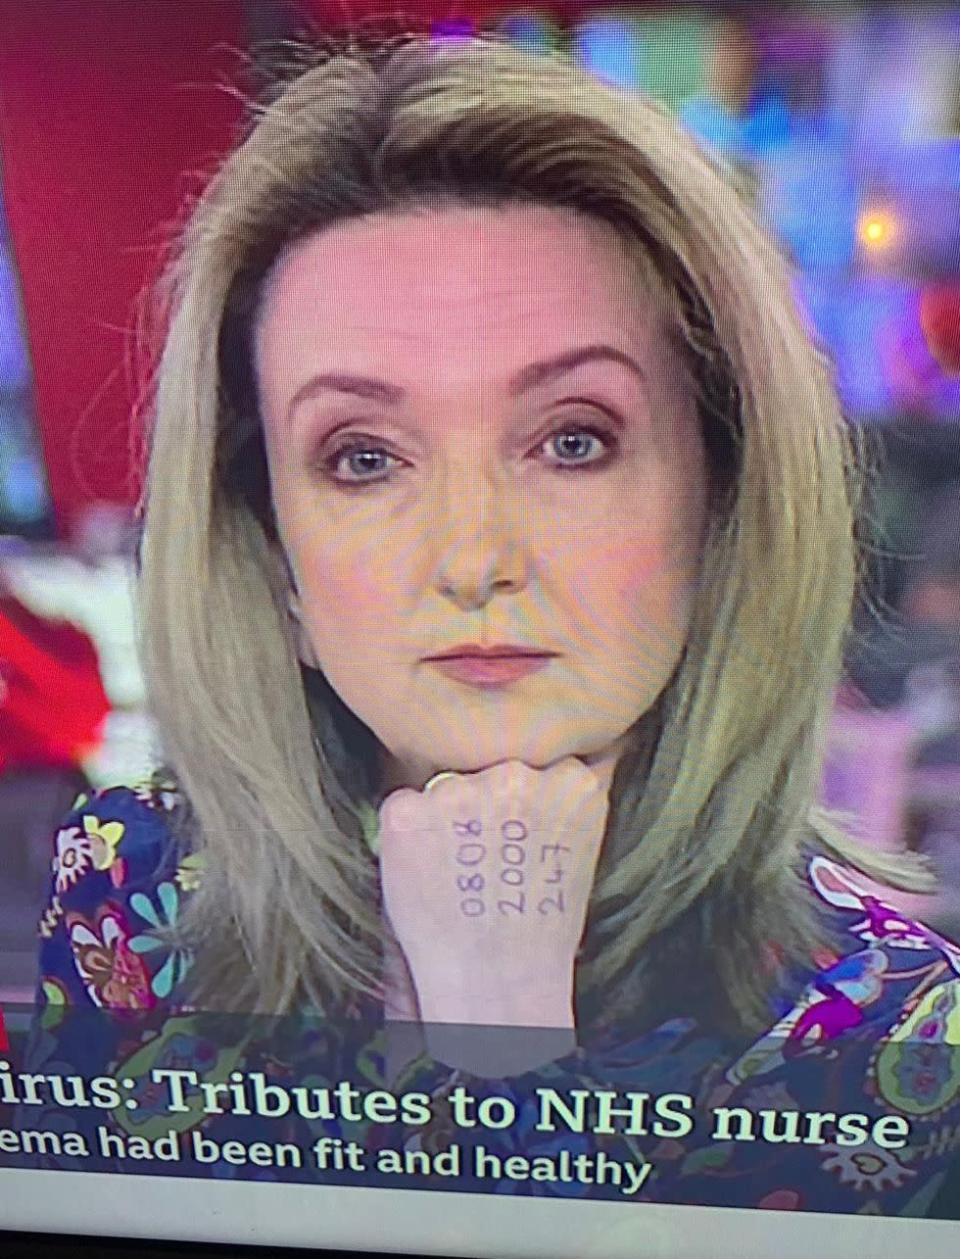 <p>Presenting BBC News on Monday morning, viewers noticed Victoria Derbyshire had a phone number written on her hand. </p><p>Inscribed was the National Domestic Abuse hotline in the UK - an attempt by the presenter to alert anyone<a href="https://www.elle.com/uk/life-and-culture/a31779483/coronavirus-self-isolation-domestic-violence/" rel="nofollow noopener" target="_blank" data-ylk="slk:trapped at home with a violent or controlling partner" class="link rapid-noclick-resp"> trapped at home with a violent or controlling partner </a>to the helpline for support.</p><p>Sharing a picture of her hand on Instagram ahead of appearing on the news, Derbyshire wrote that in just the first couple of months of lockdown there has been an 150% increase on visitors to the hotline's website and 25% increase in calls to the hotline since lockdown.</p><p>The presenter was <a href="https://twitter.com/VictimsComm/status/1247155353000628225?s=20" rel="nofollow noopener" target="_blank" data-ylk="slk:overwhelmingly praised online" class="link rapid-noclick-resp">overwhelmingly praised online</a> for the move.</p>